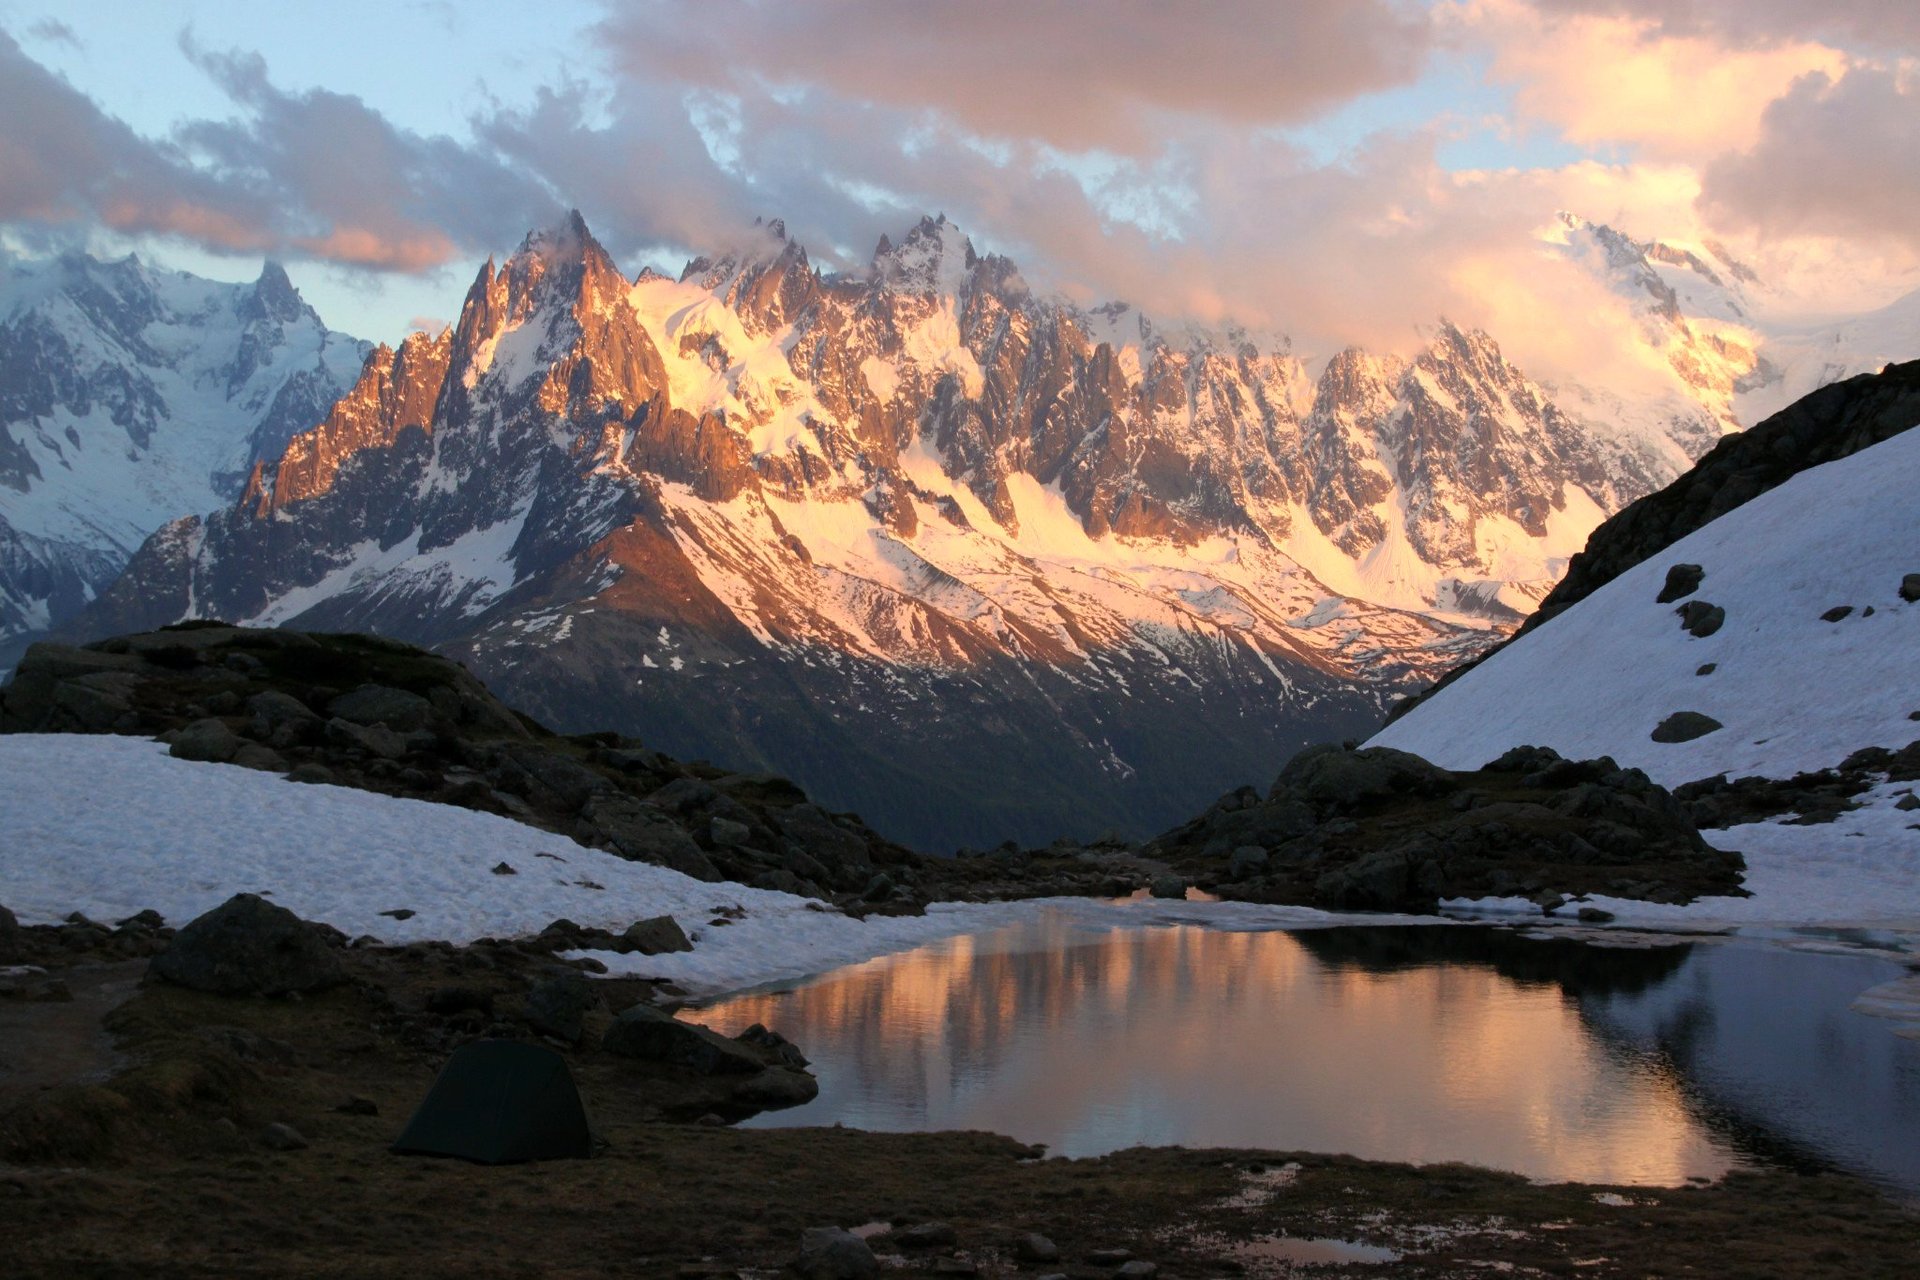 Wild camping in the Aiguilles Rouges